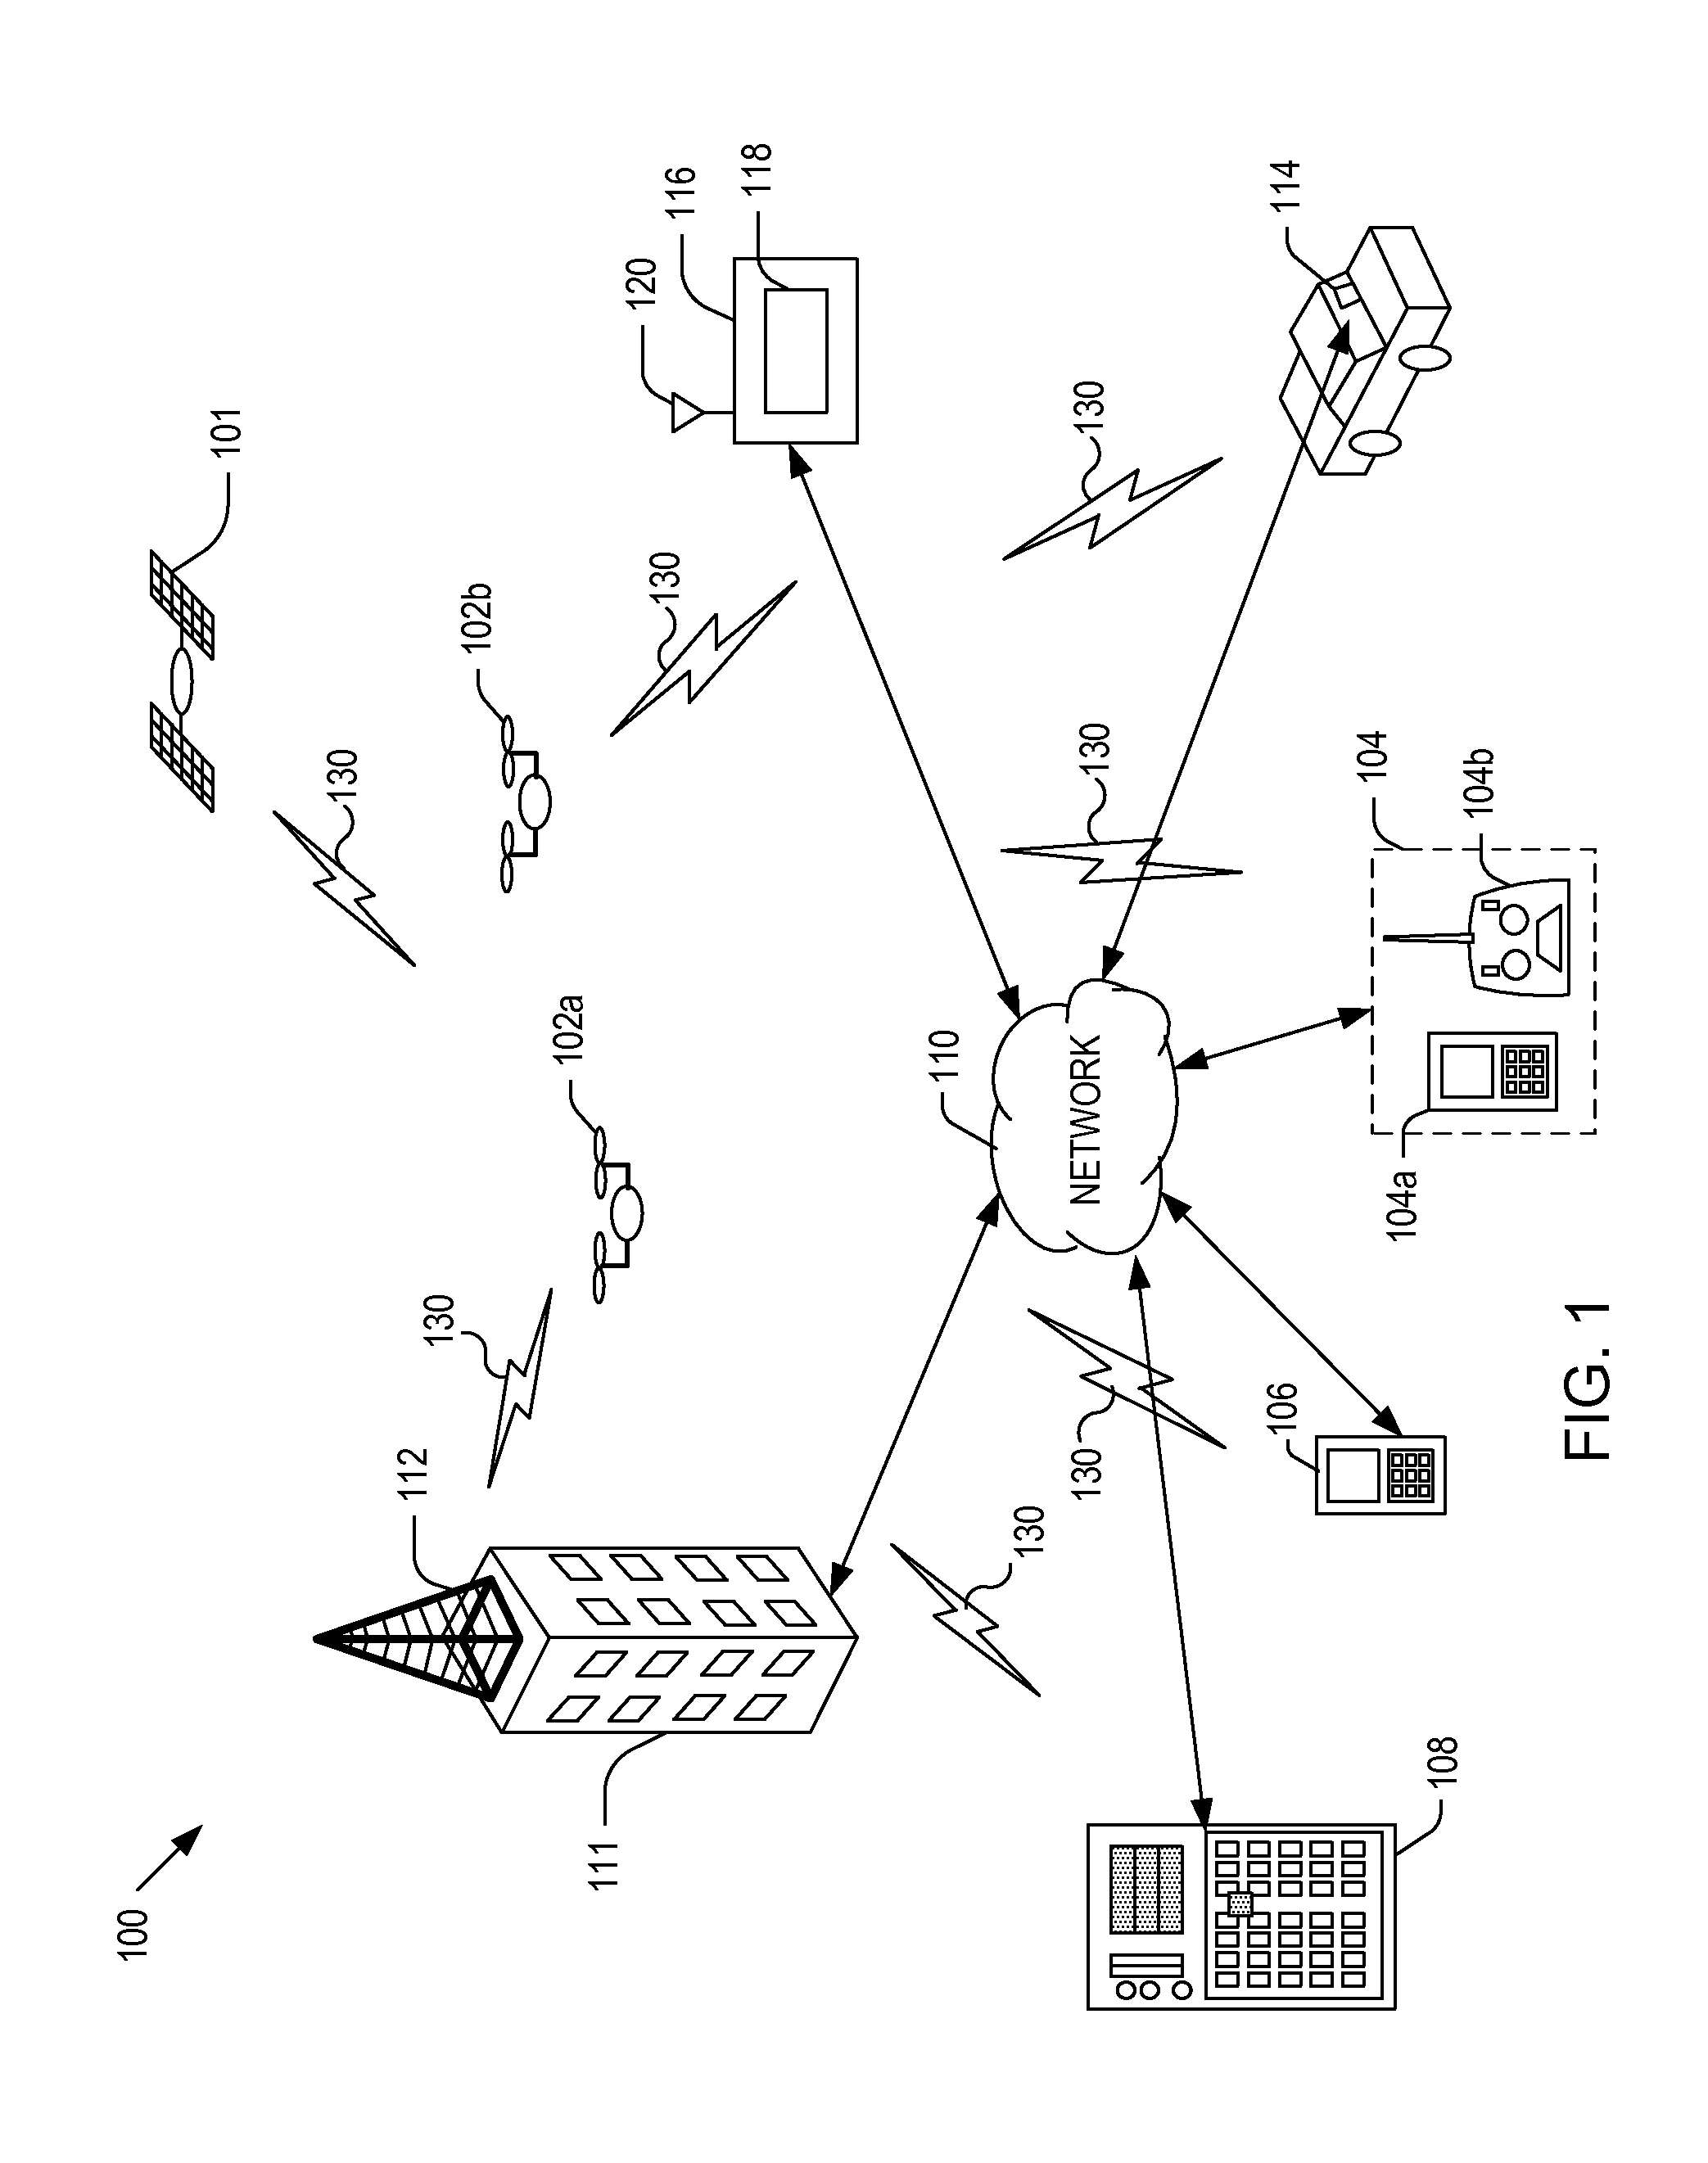 Systems and methods for monitoring unmanned aerial vehicles